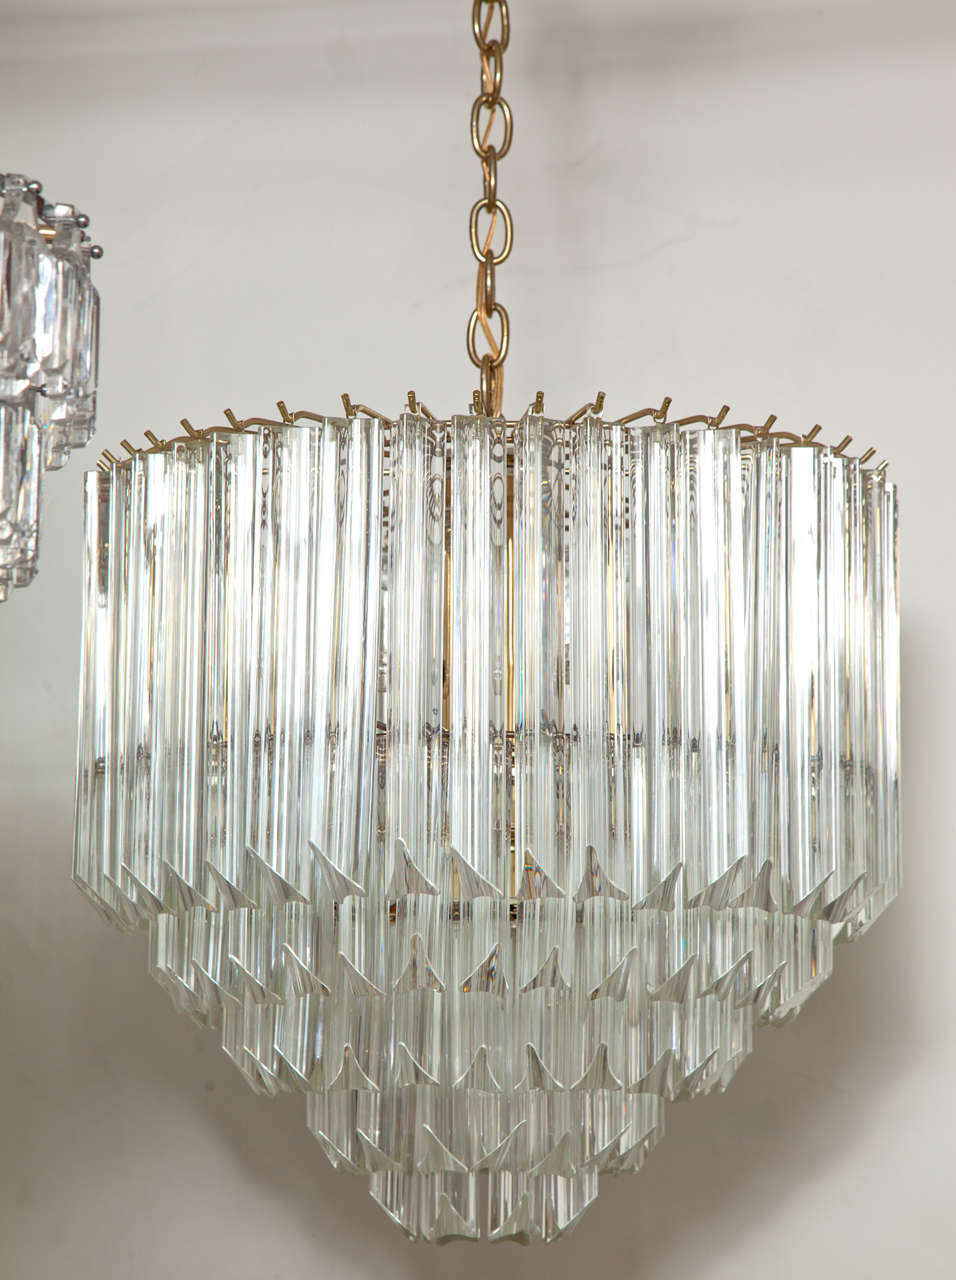 Fantastic large cascading five-tier crystal prism chandelier on a heavy brass chain and canopy. Imported from Italy and sold through Camer glass, NYC.
Crystal body measures 21